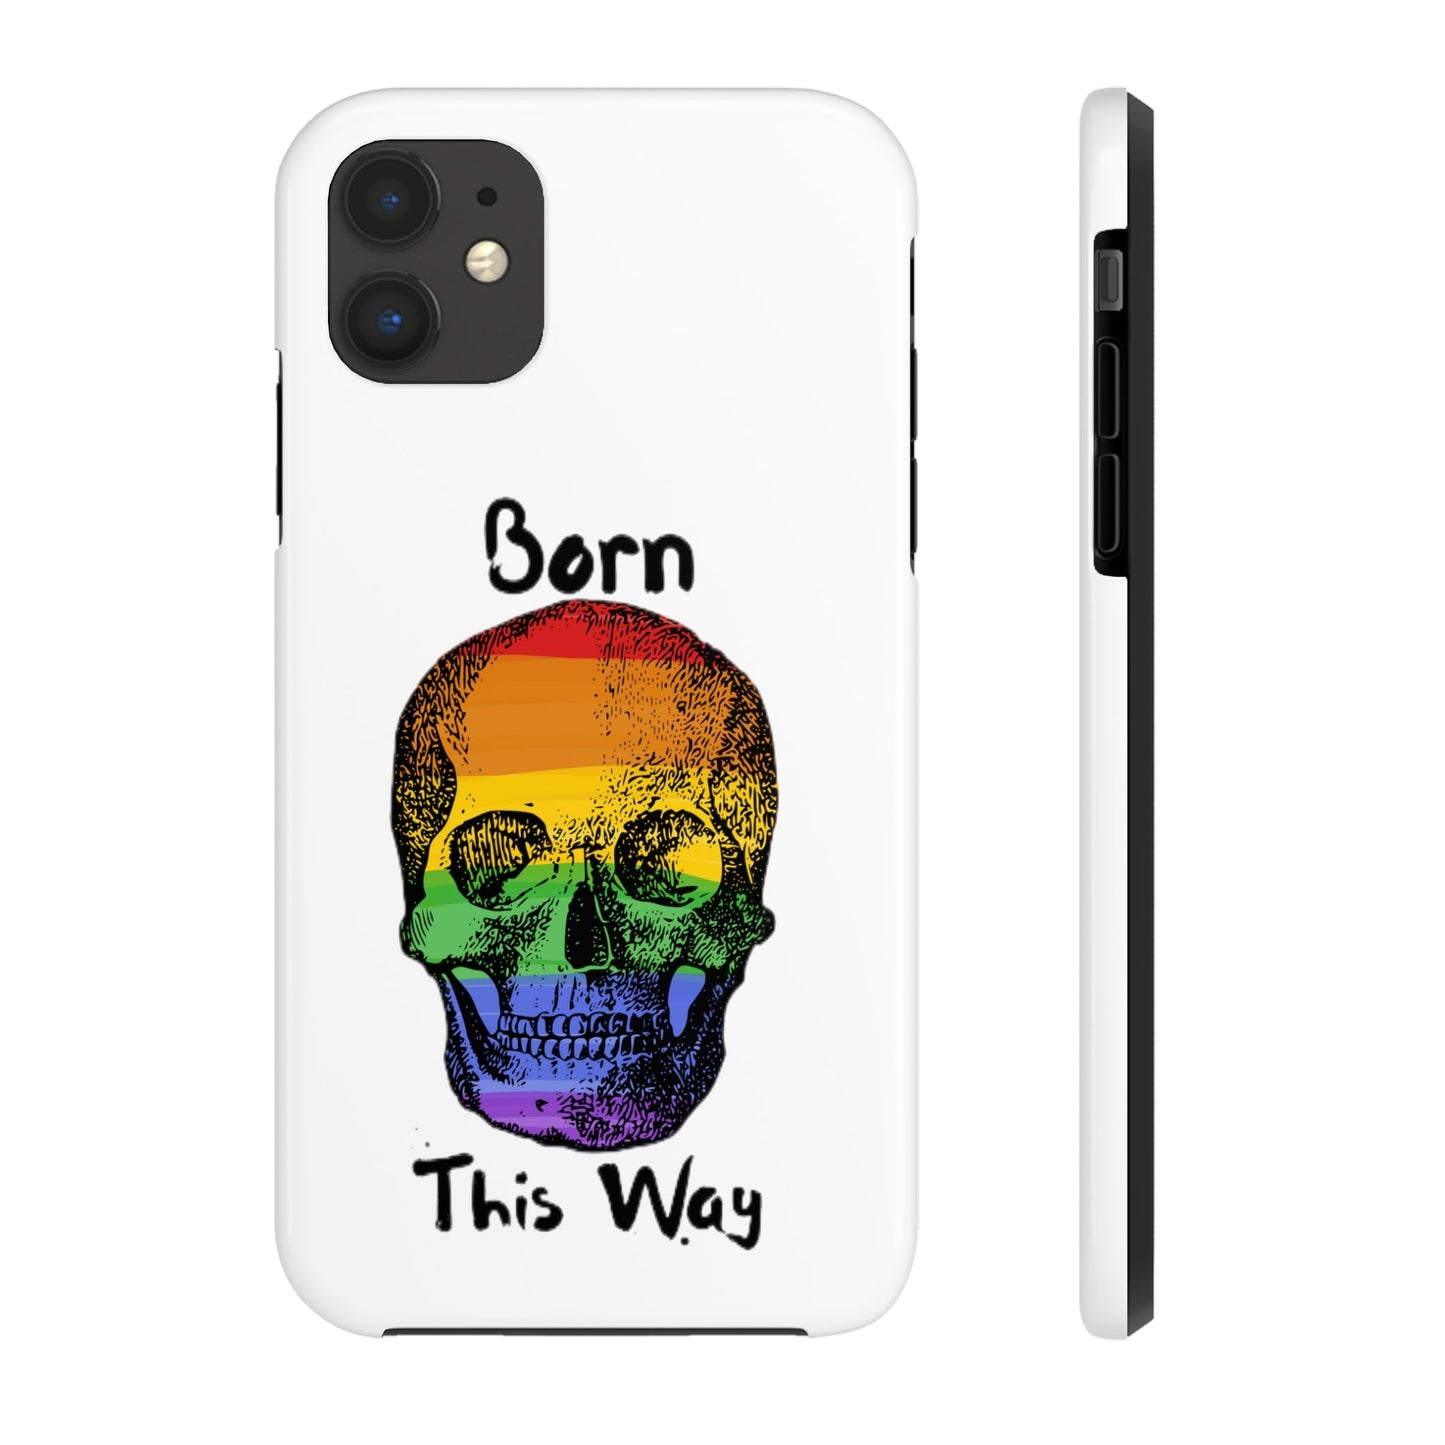 Born This Way Skeleton Pride Tough Phone Cases for iPhone 7, 8, X, 11, 12, 13, 14 and morePhone CaseVTZdesignsiPhone XSAccessoriesGlossyiPhone Cases